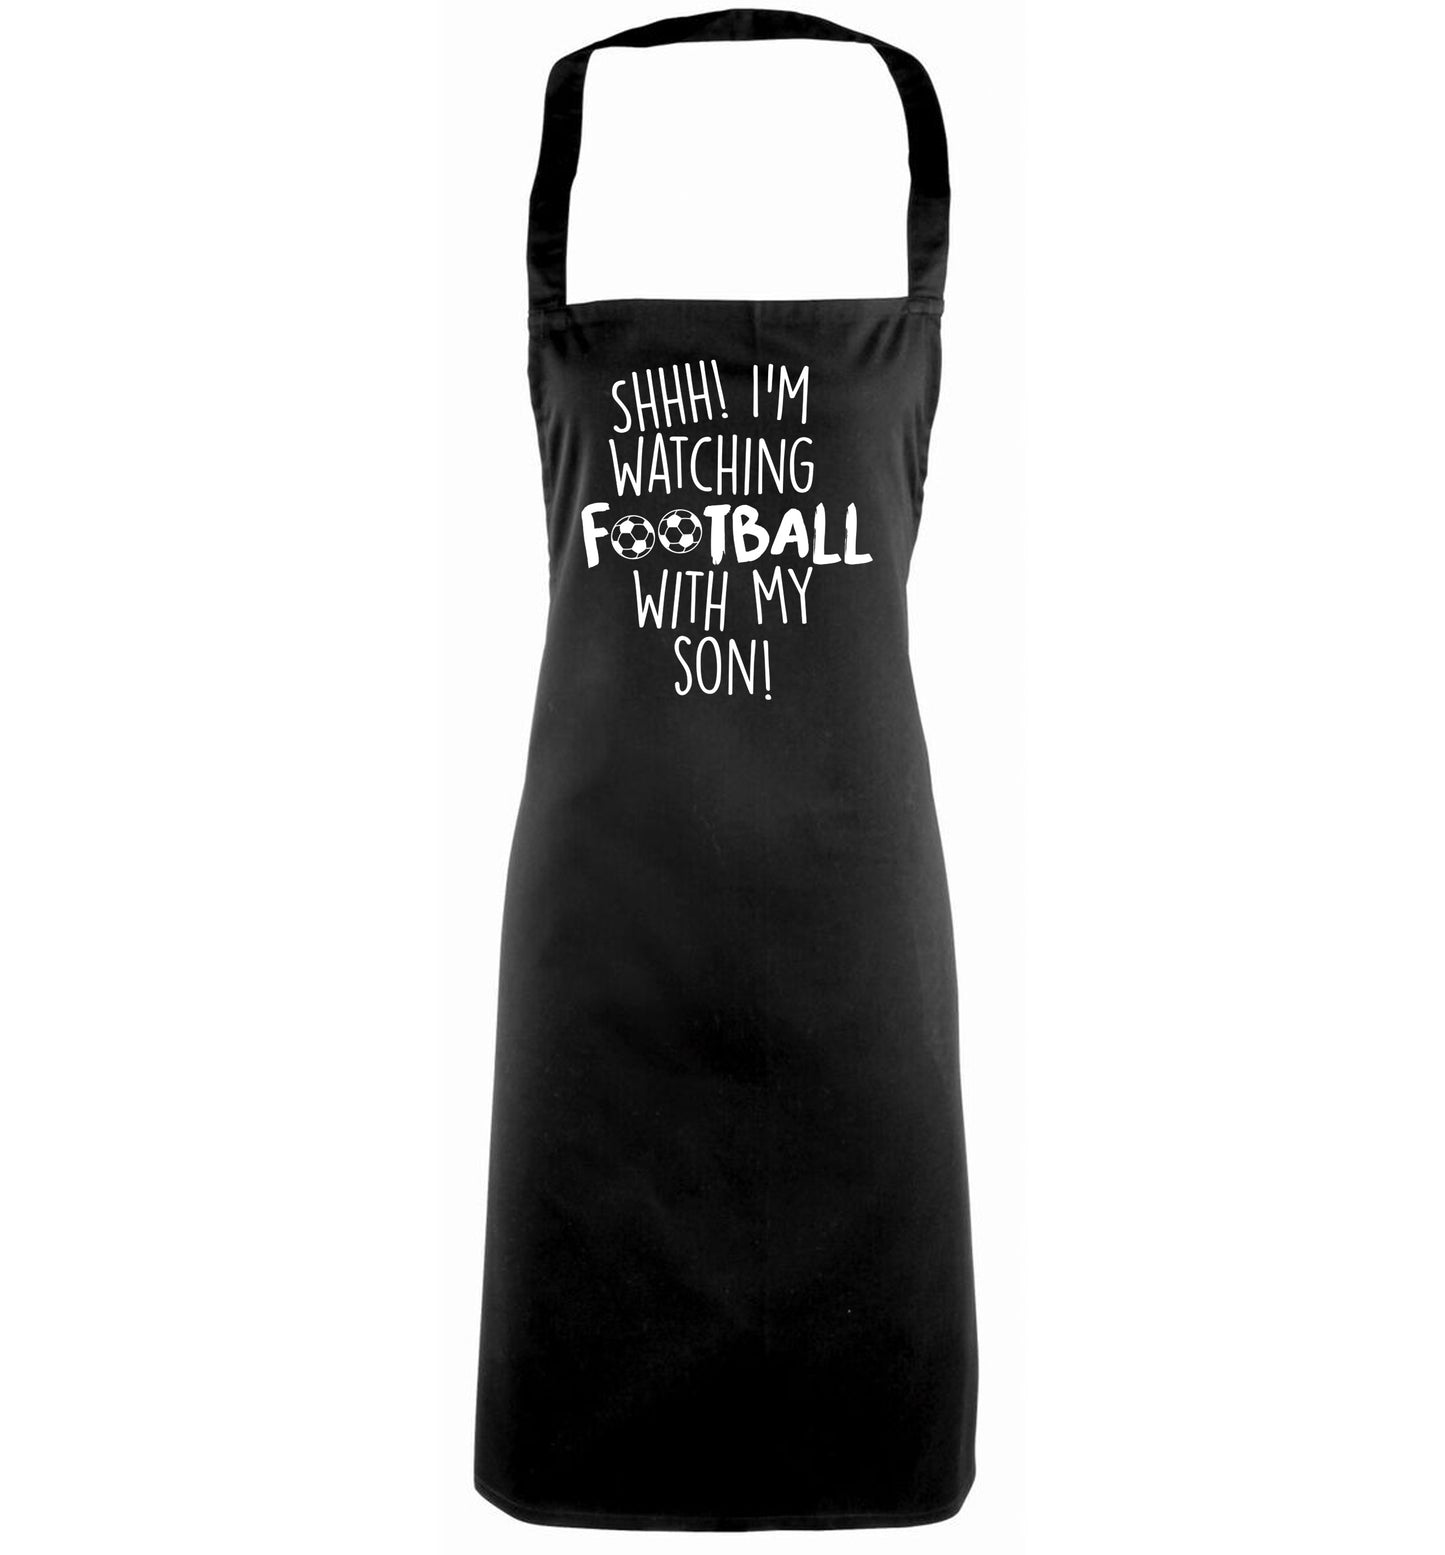 Shhh I'm watching football with my son black apron